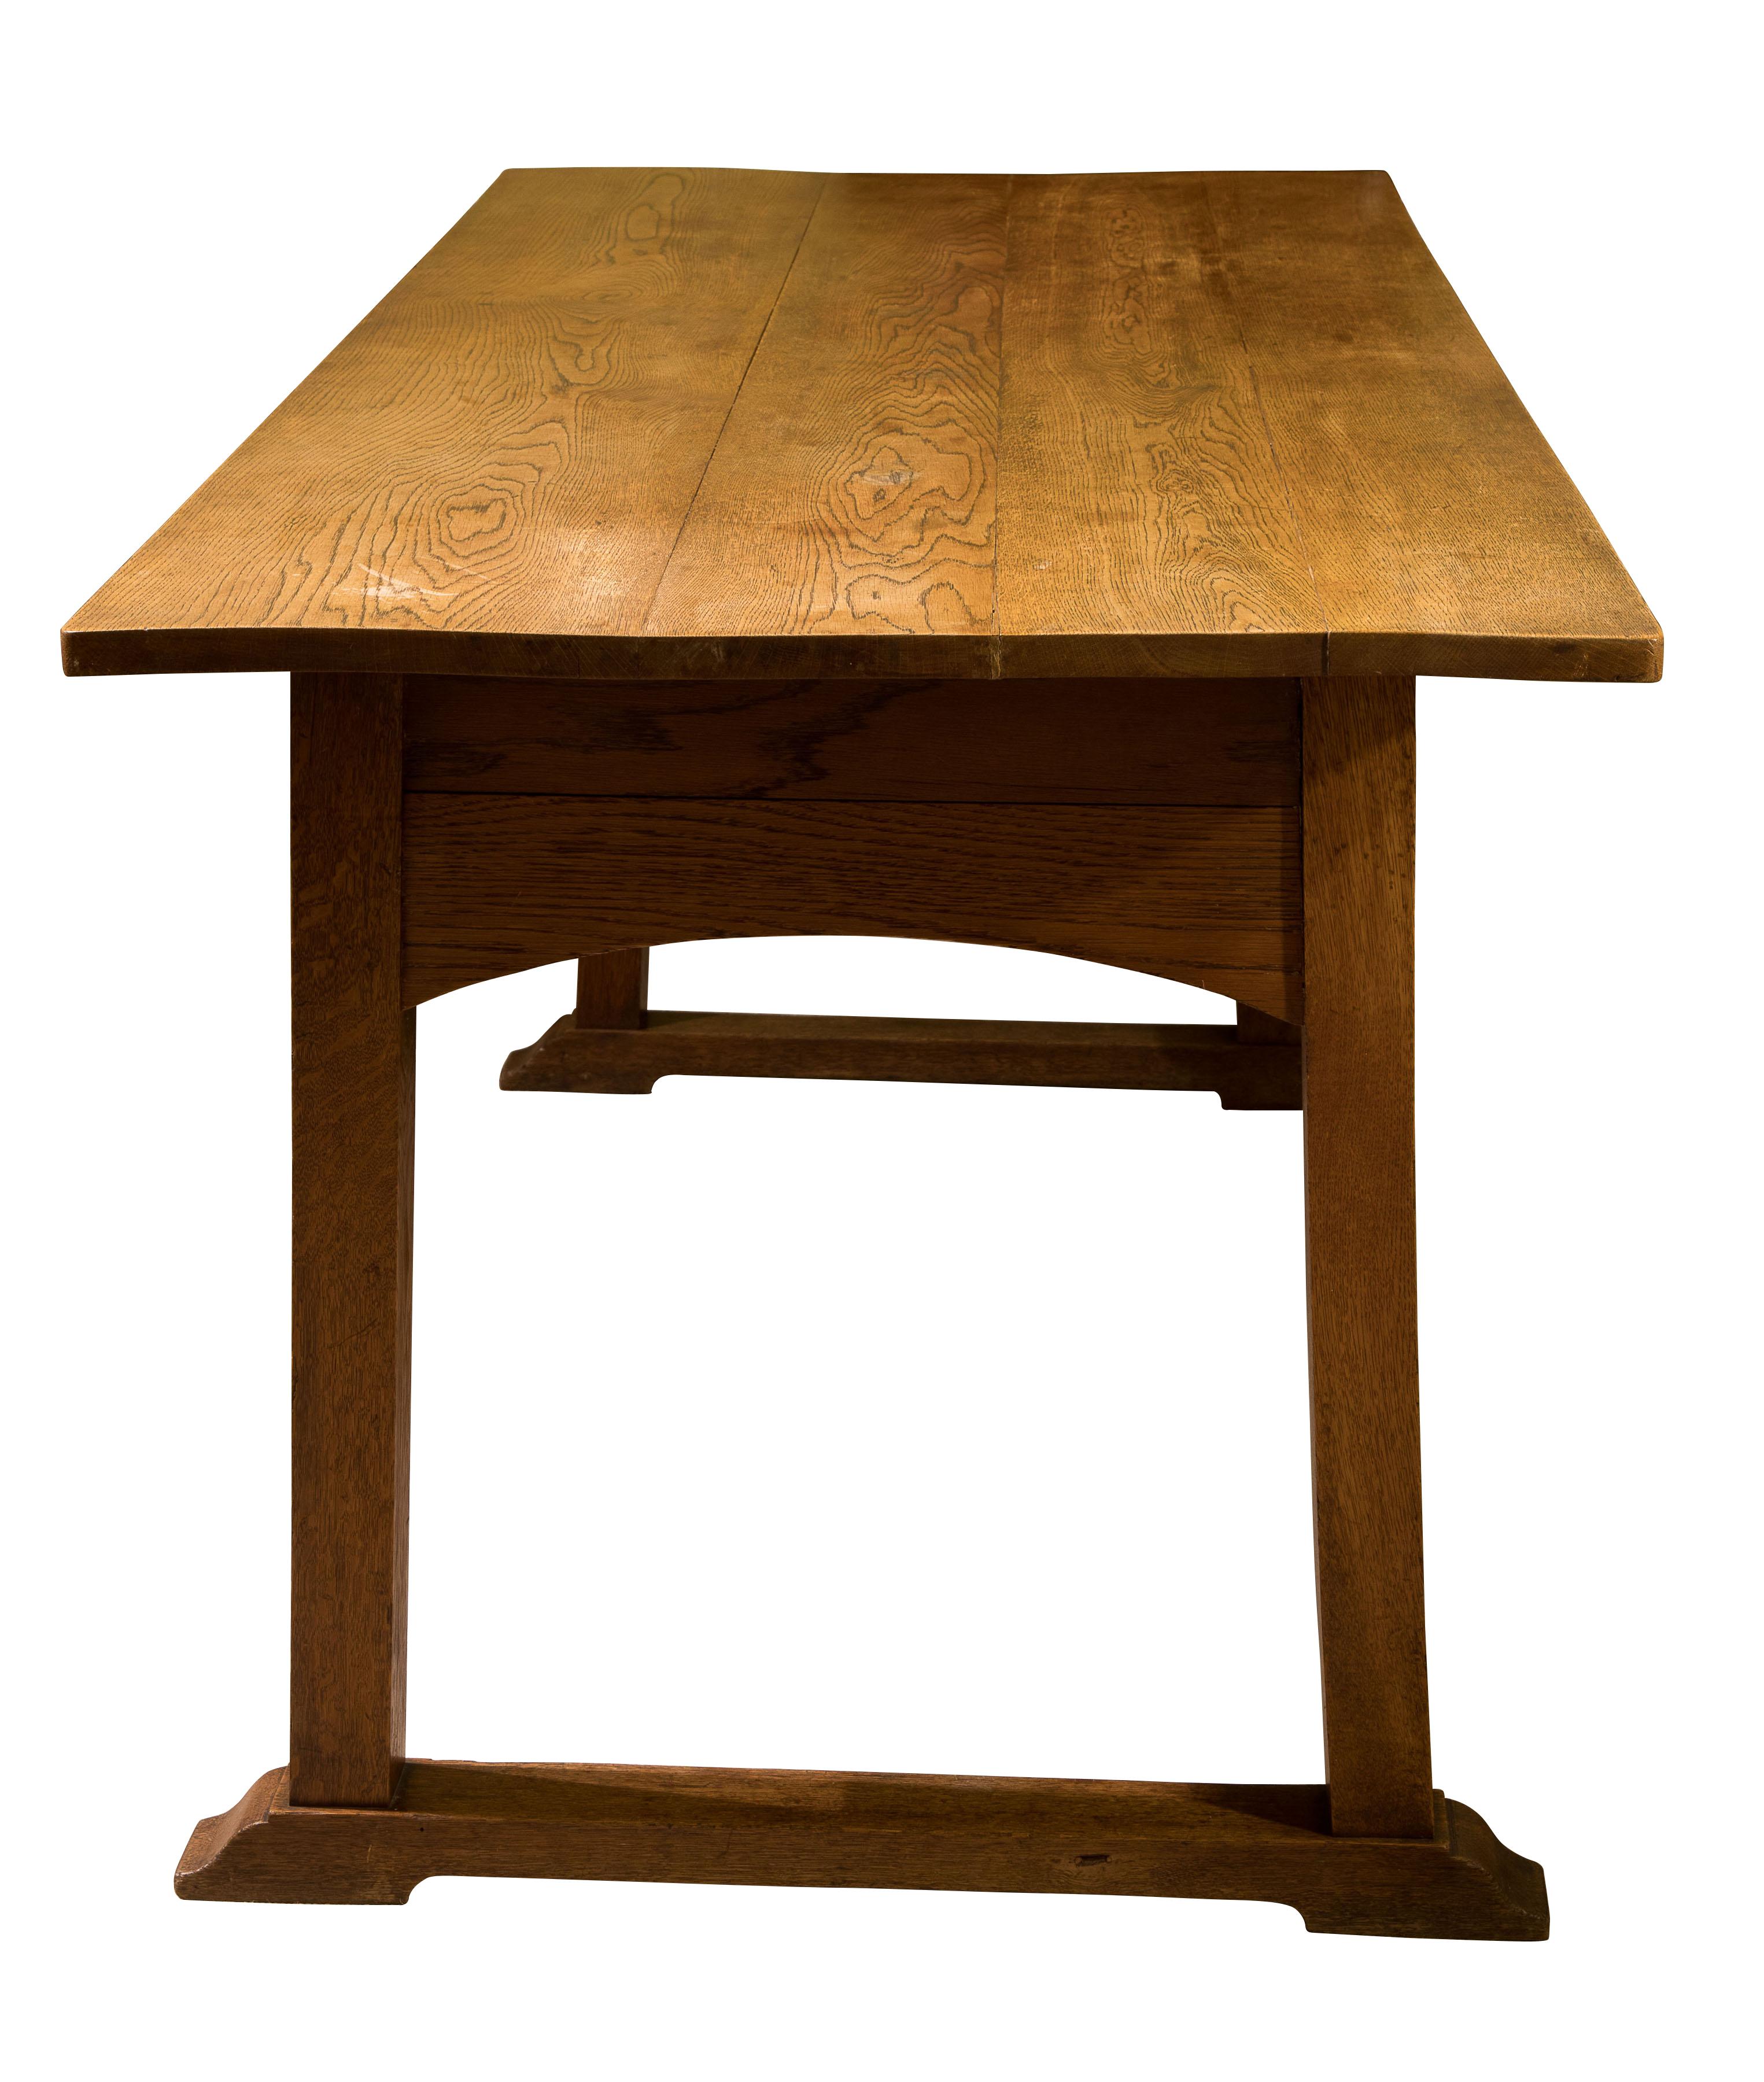 English Heal & Son Arts & Crafts Oak Refrectory Dining Table c1905